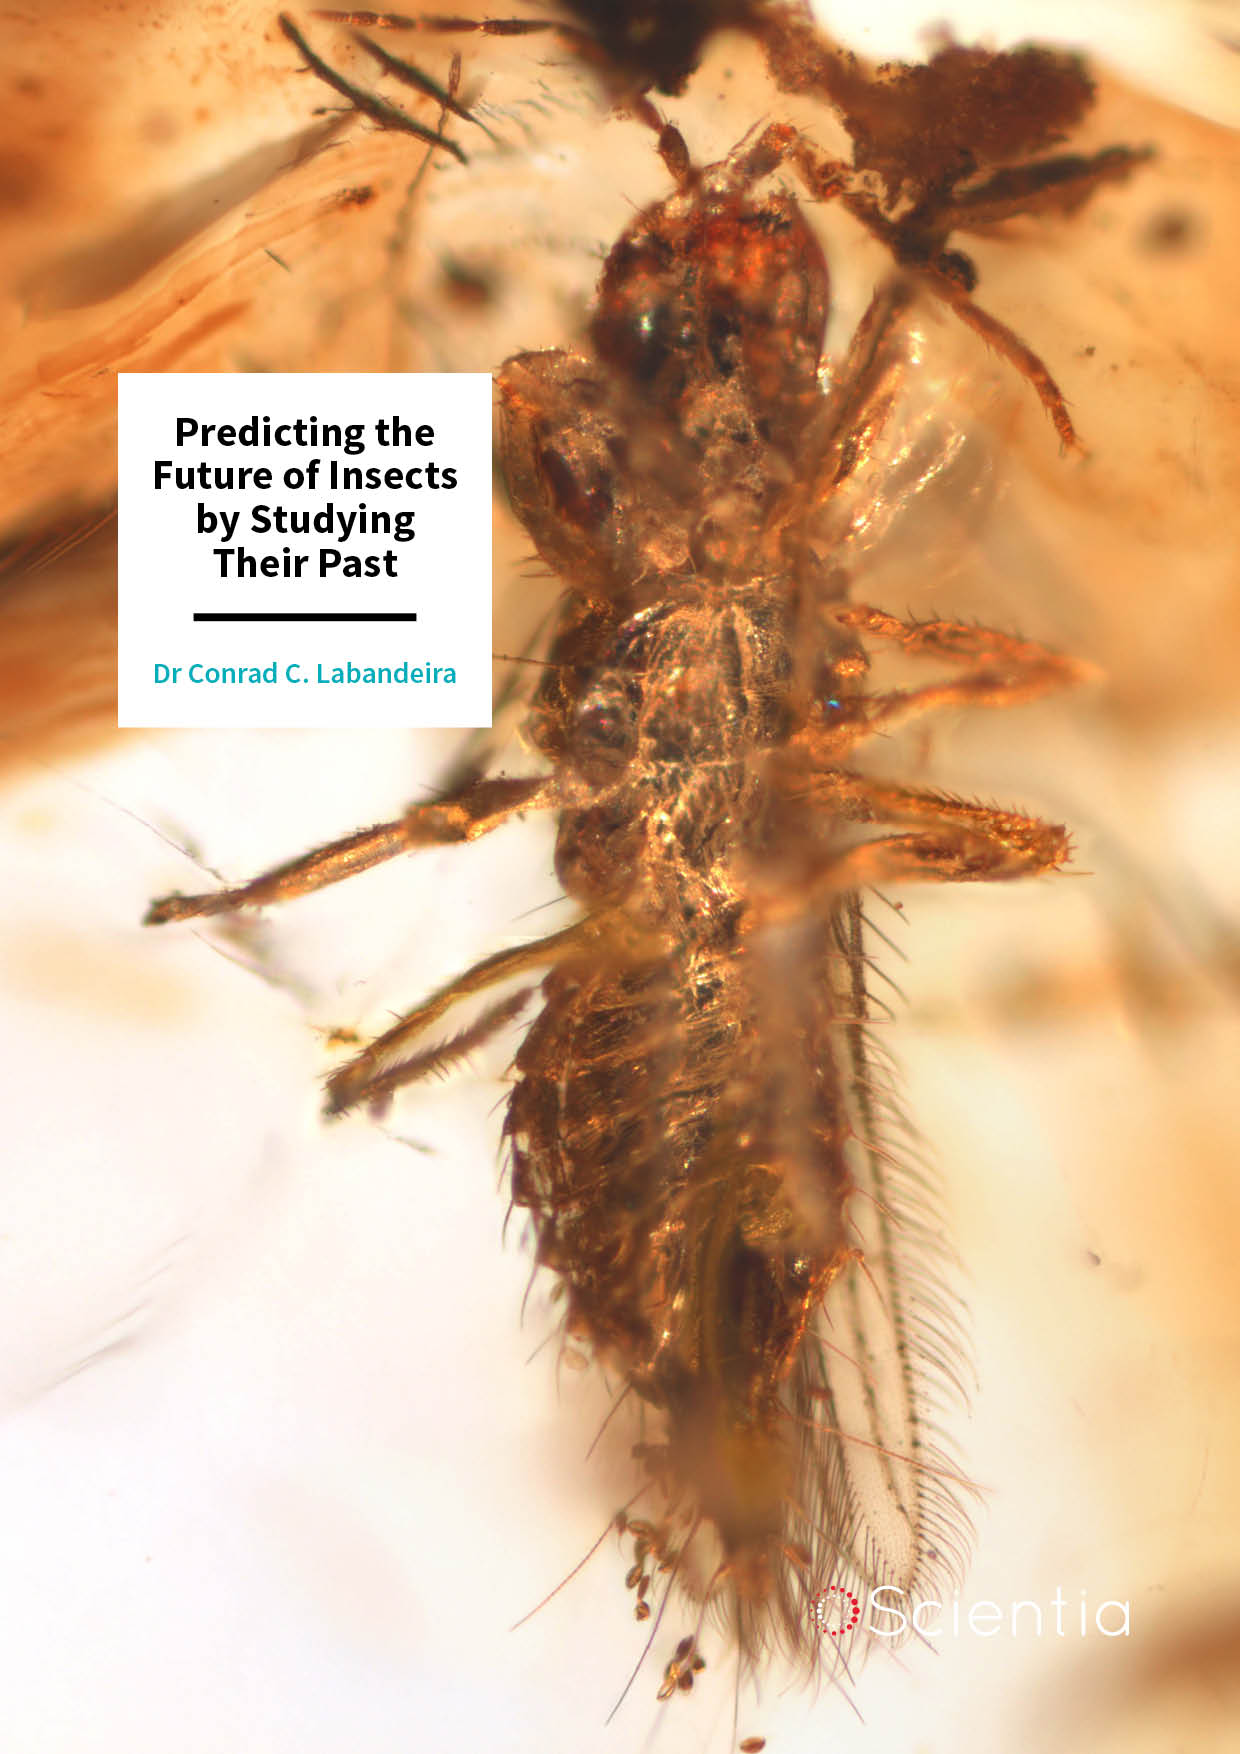 Dr Conrad Labandeira – Predicting the Future of Insects by Studying Their Past